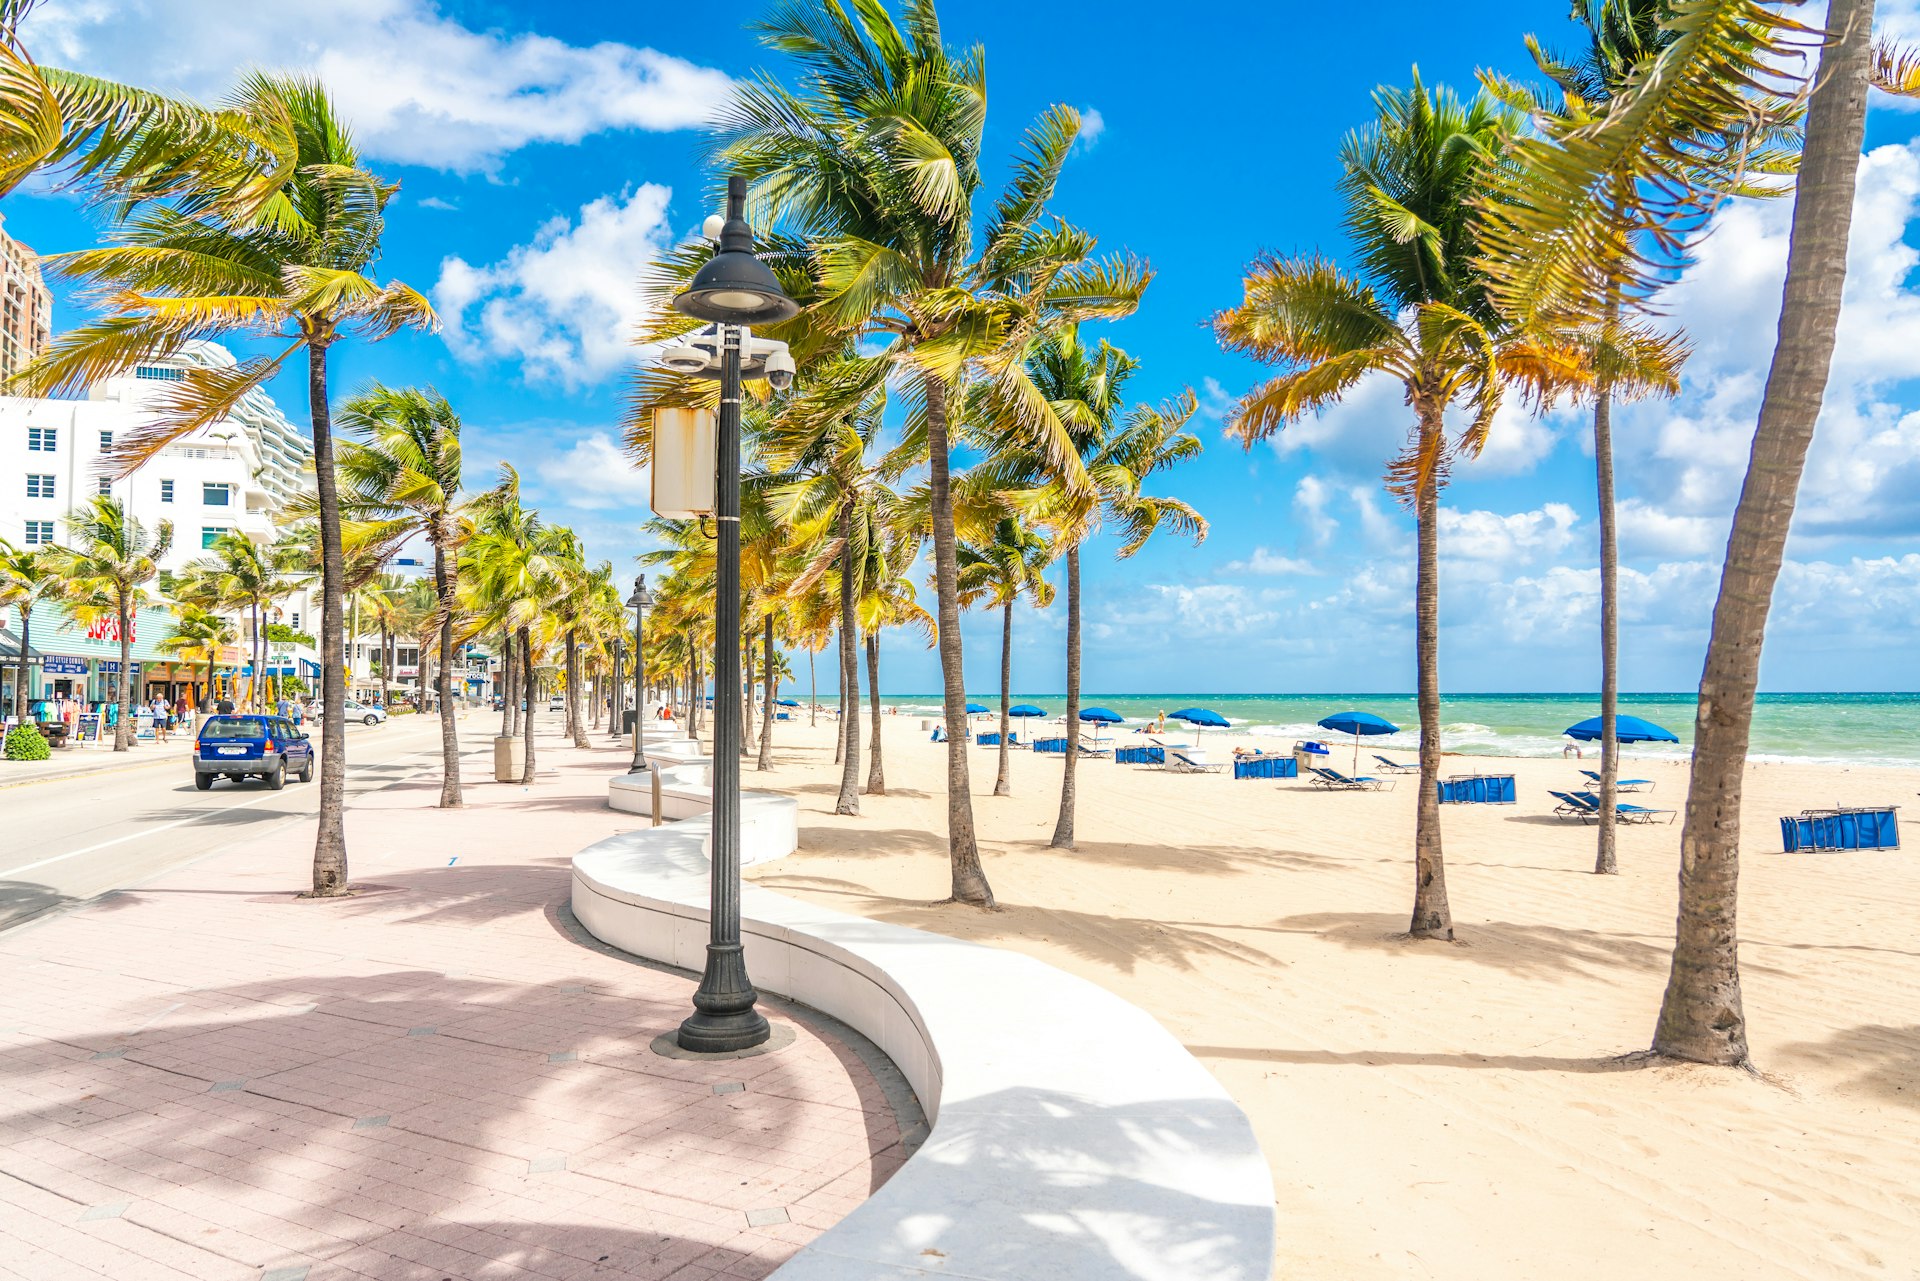 The seafront beach promenade in Fort Lauderdale is lined with palm trees, while blue sun loungers are laid out on the white-sand beach beyond. 